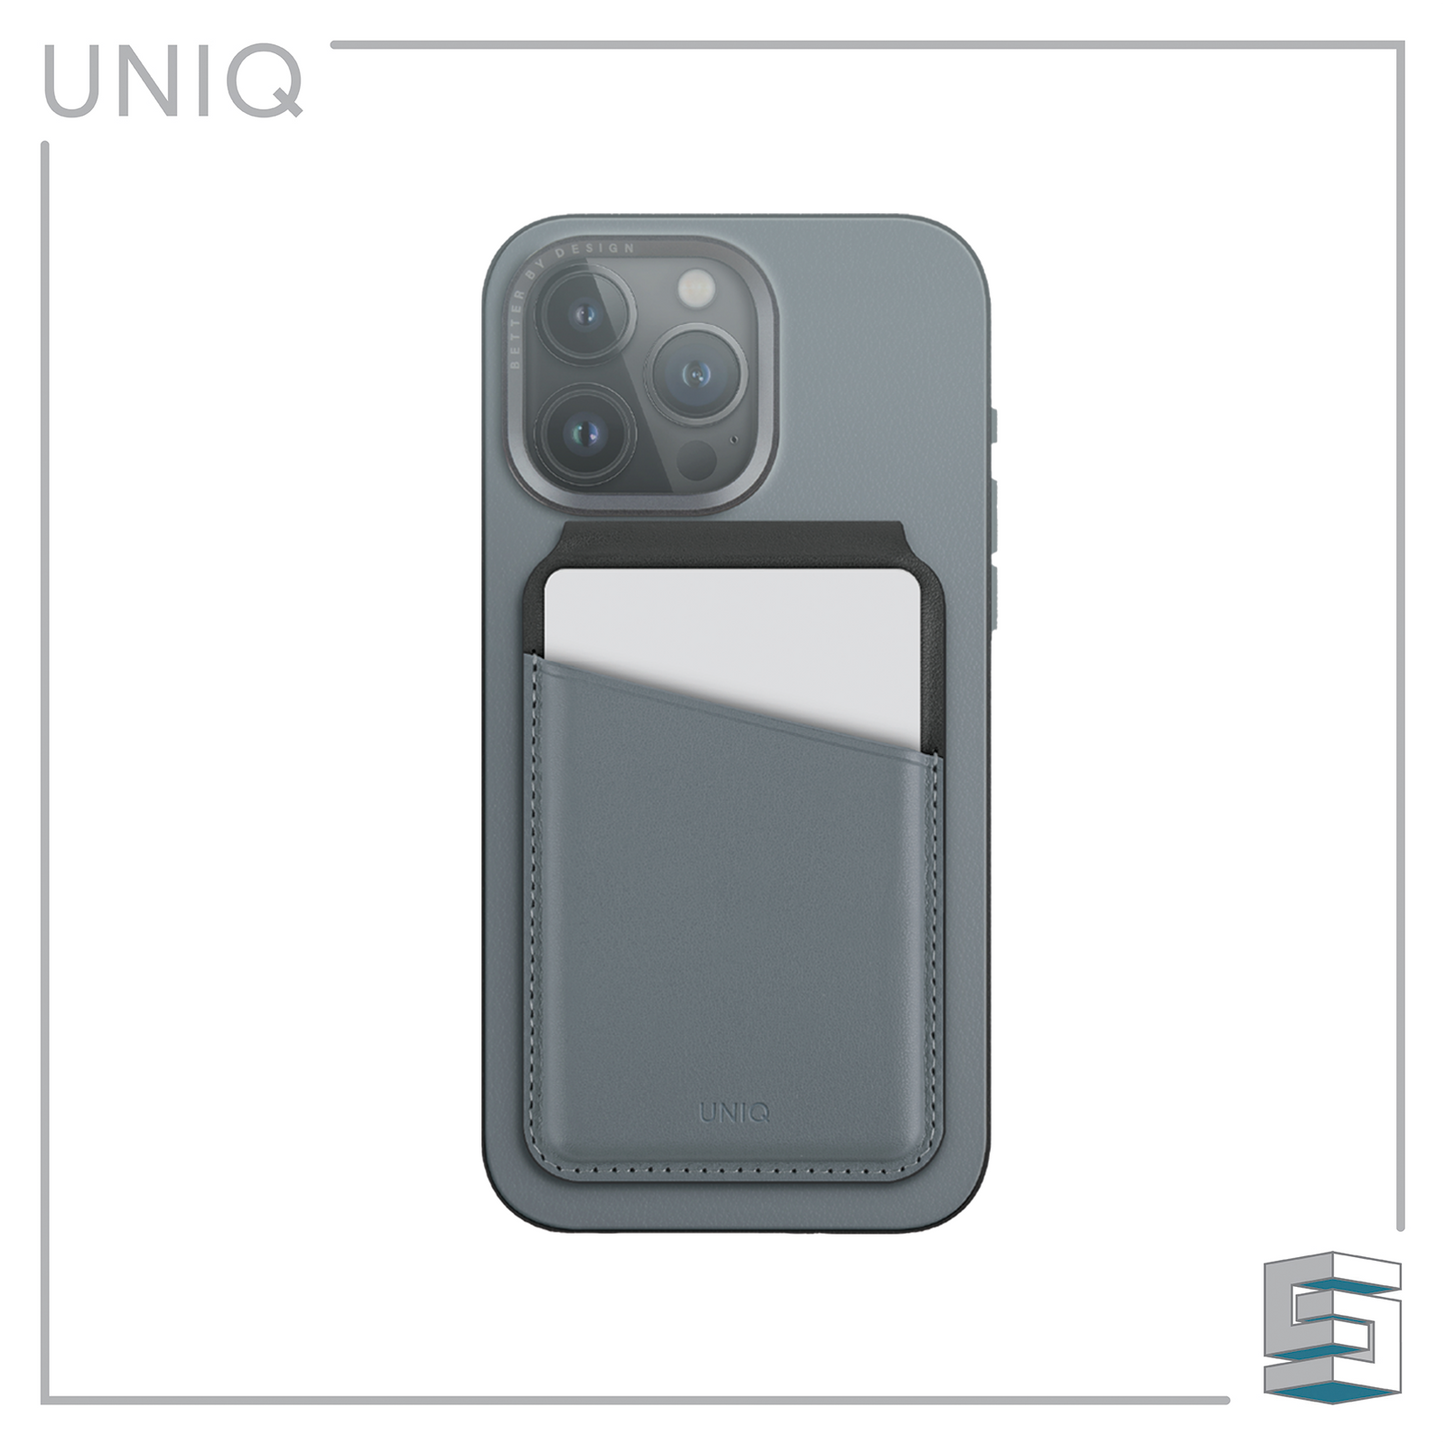 Cardholder & Stand - UNIQ Lyden Duo Series Global Synergy Concepts